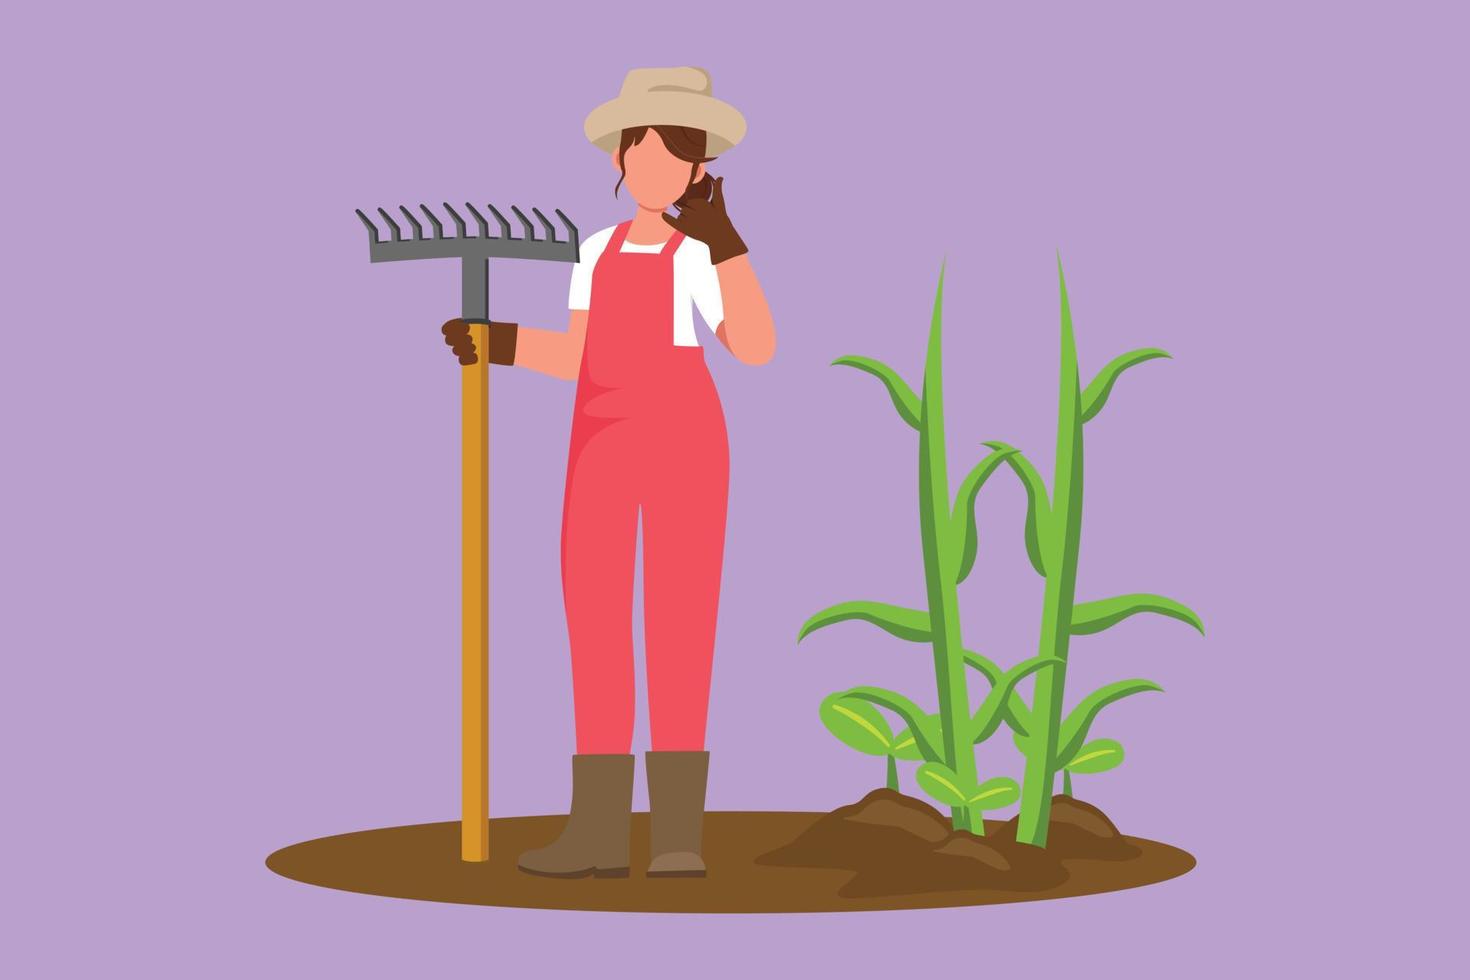 Character flat drawing female farmer stands with call me gesture, wearing straw hat, carrying shovel to plant crop or harvest on farmland. Rural agricultural worker. Cartoon design vector illustration